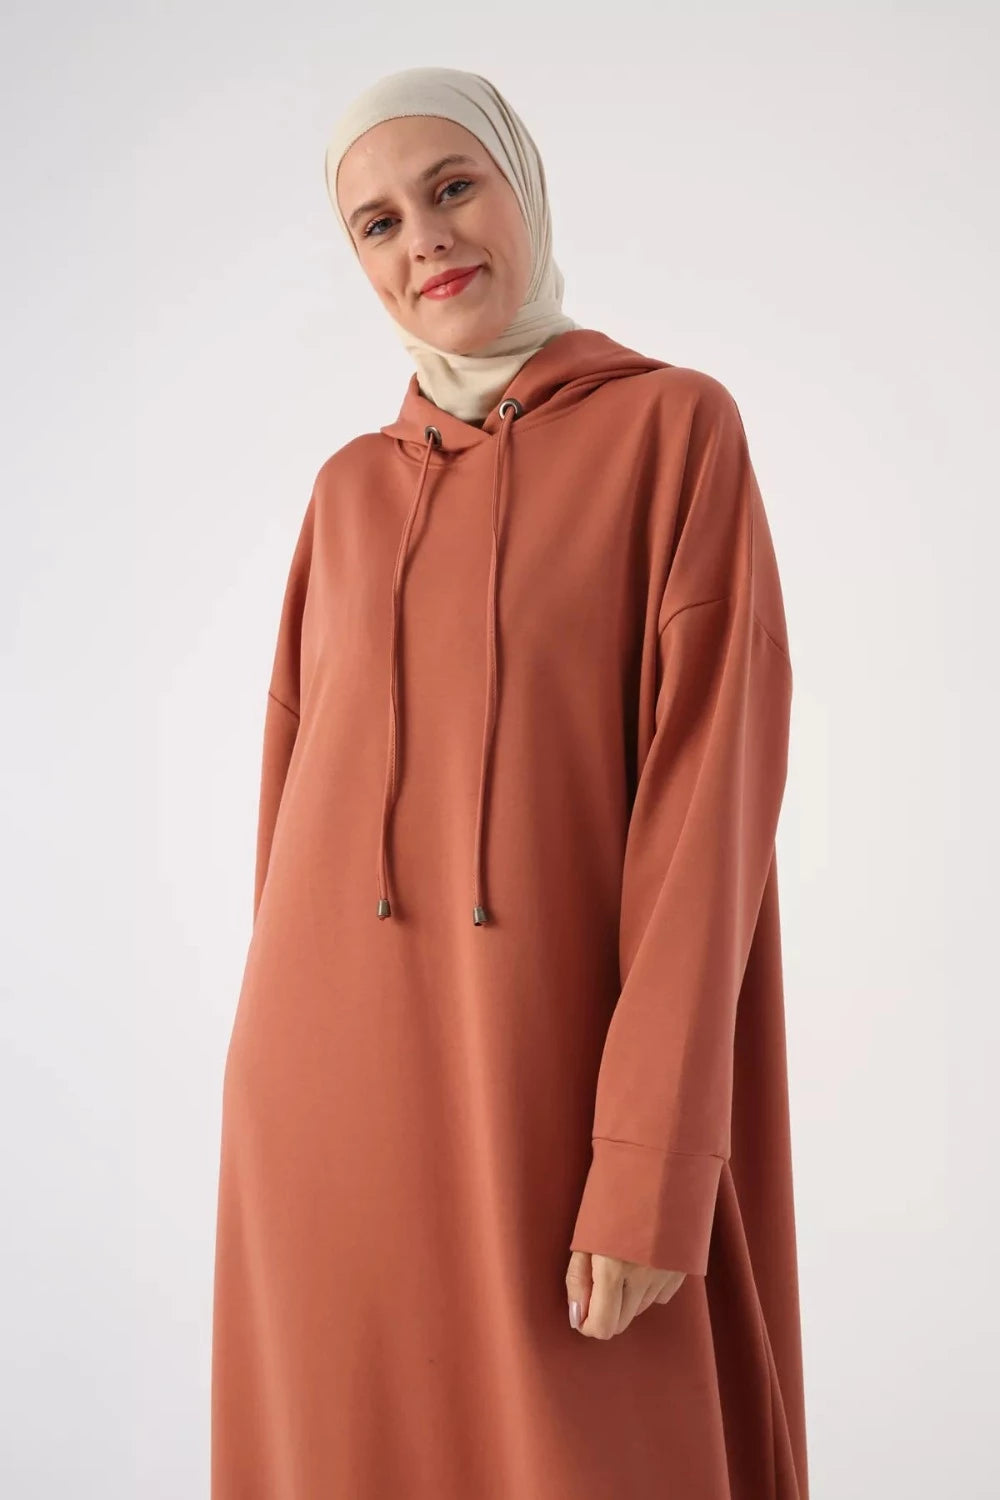 Plus Size Modest Hooded Knitted Dress | Cinnamon